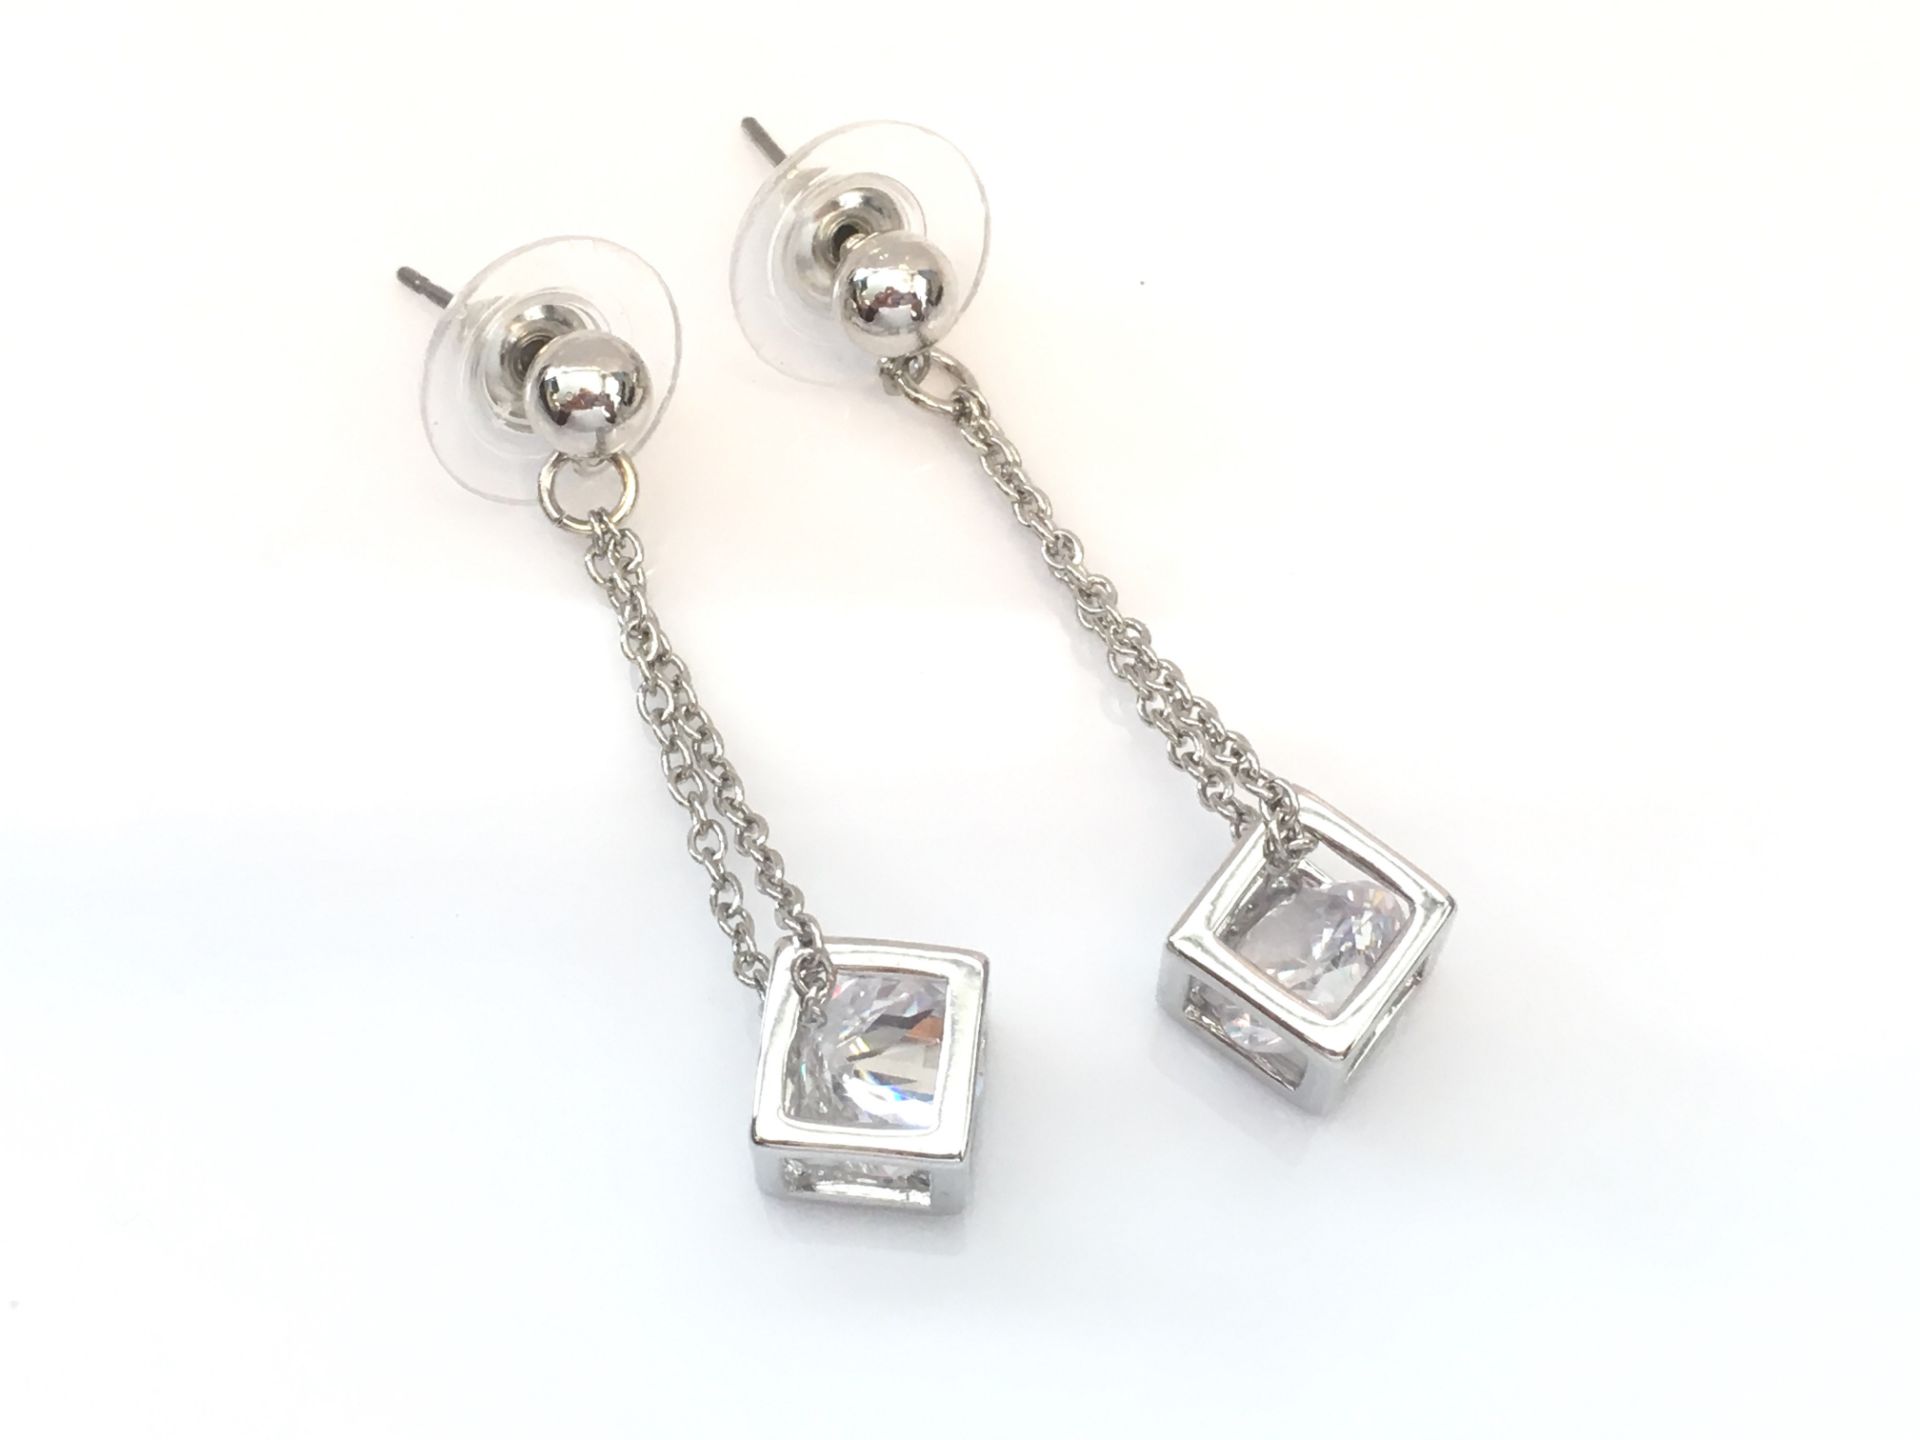 Silver Necklace and Earring set with Swarovski Crystal AND CUBE DETAIL - Image 4 of 4